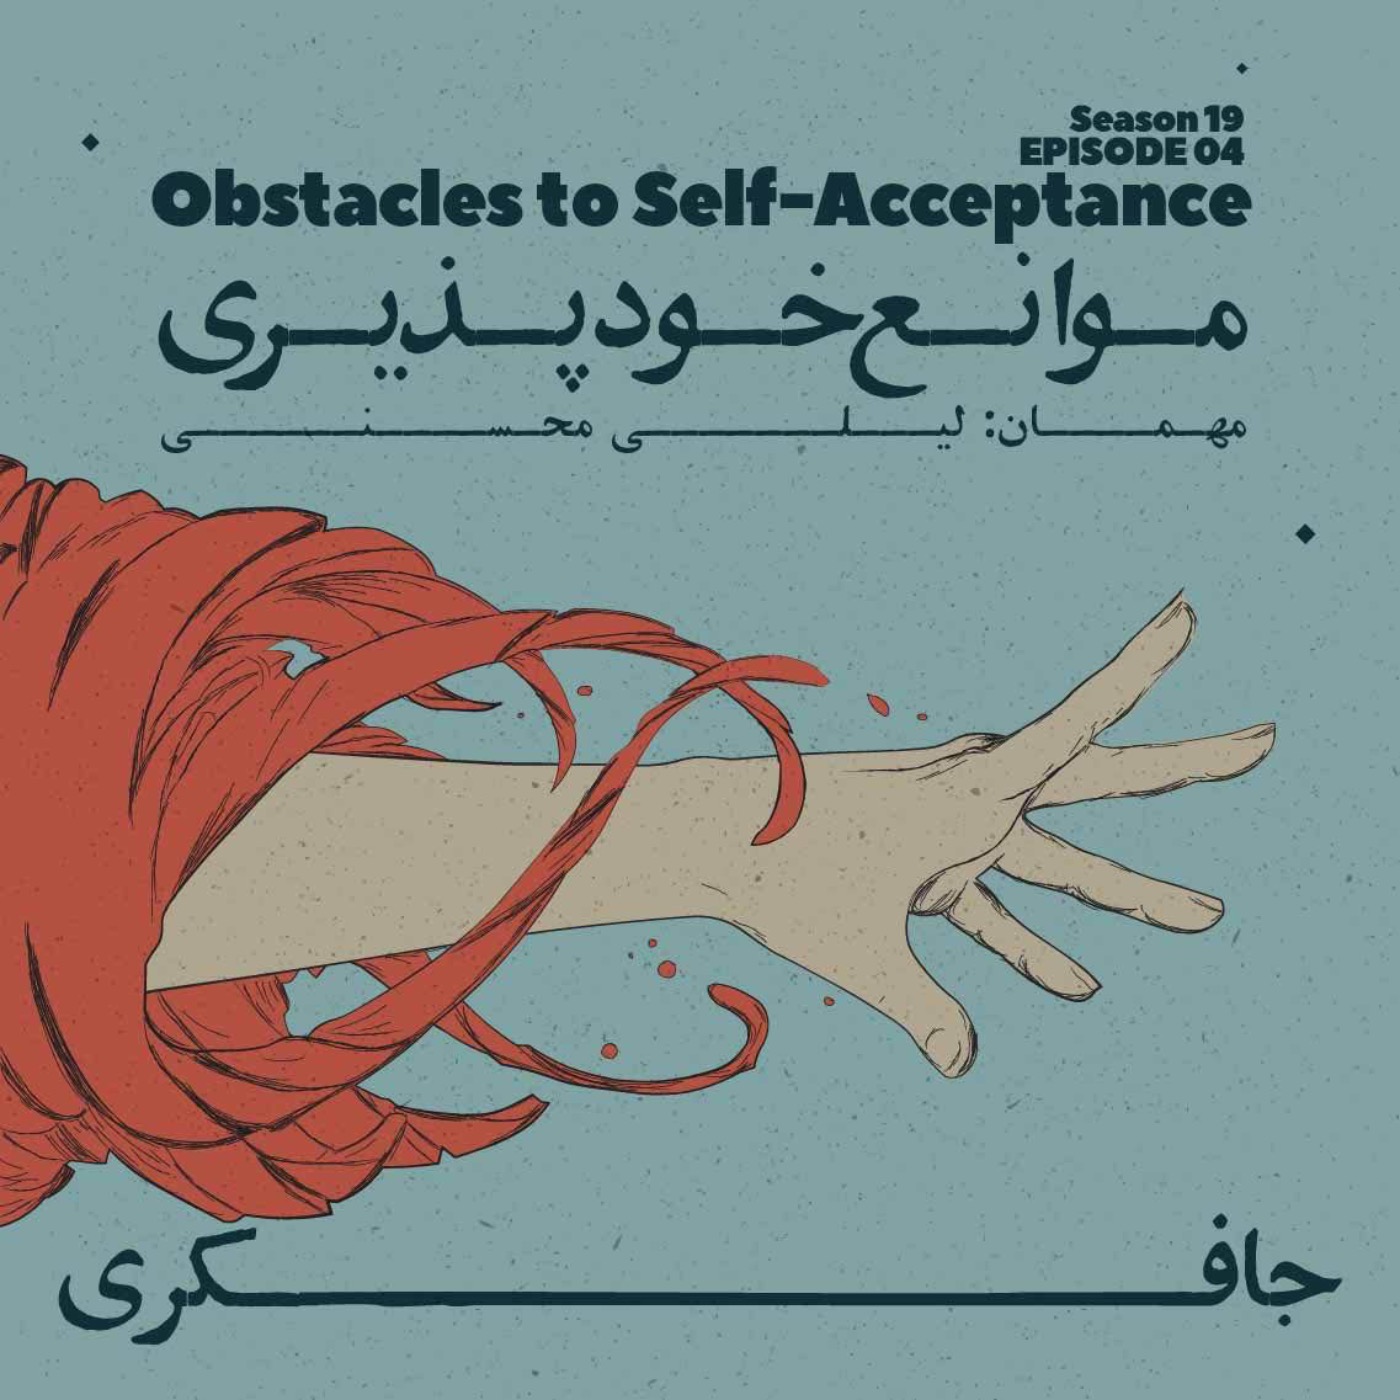 Episode 04 - Obstacles to Self-Acceptance (موانع خود پذیری)